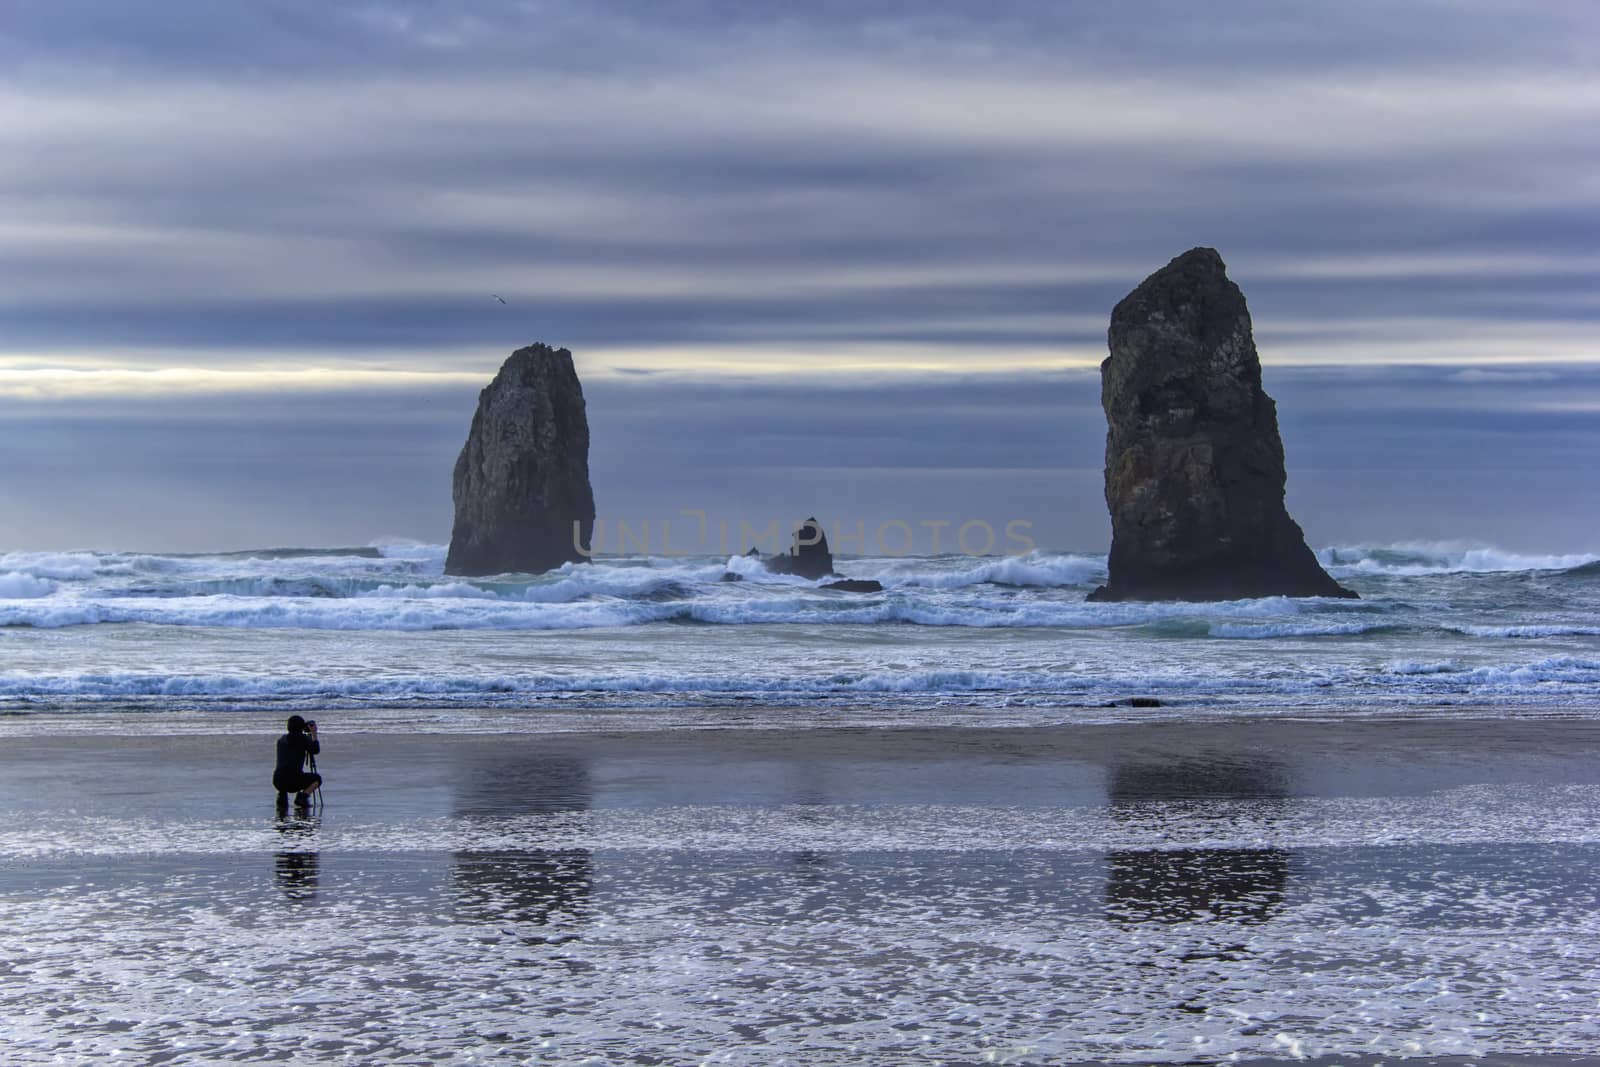 Photographer at Cannon Beach by Davidgn